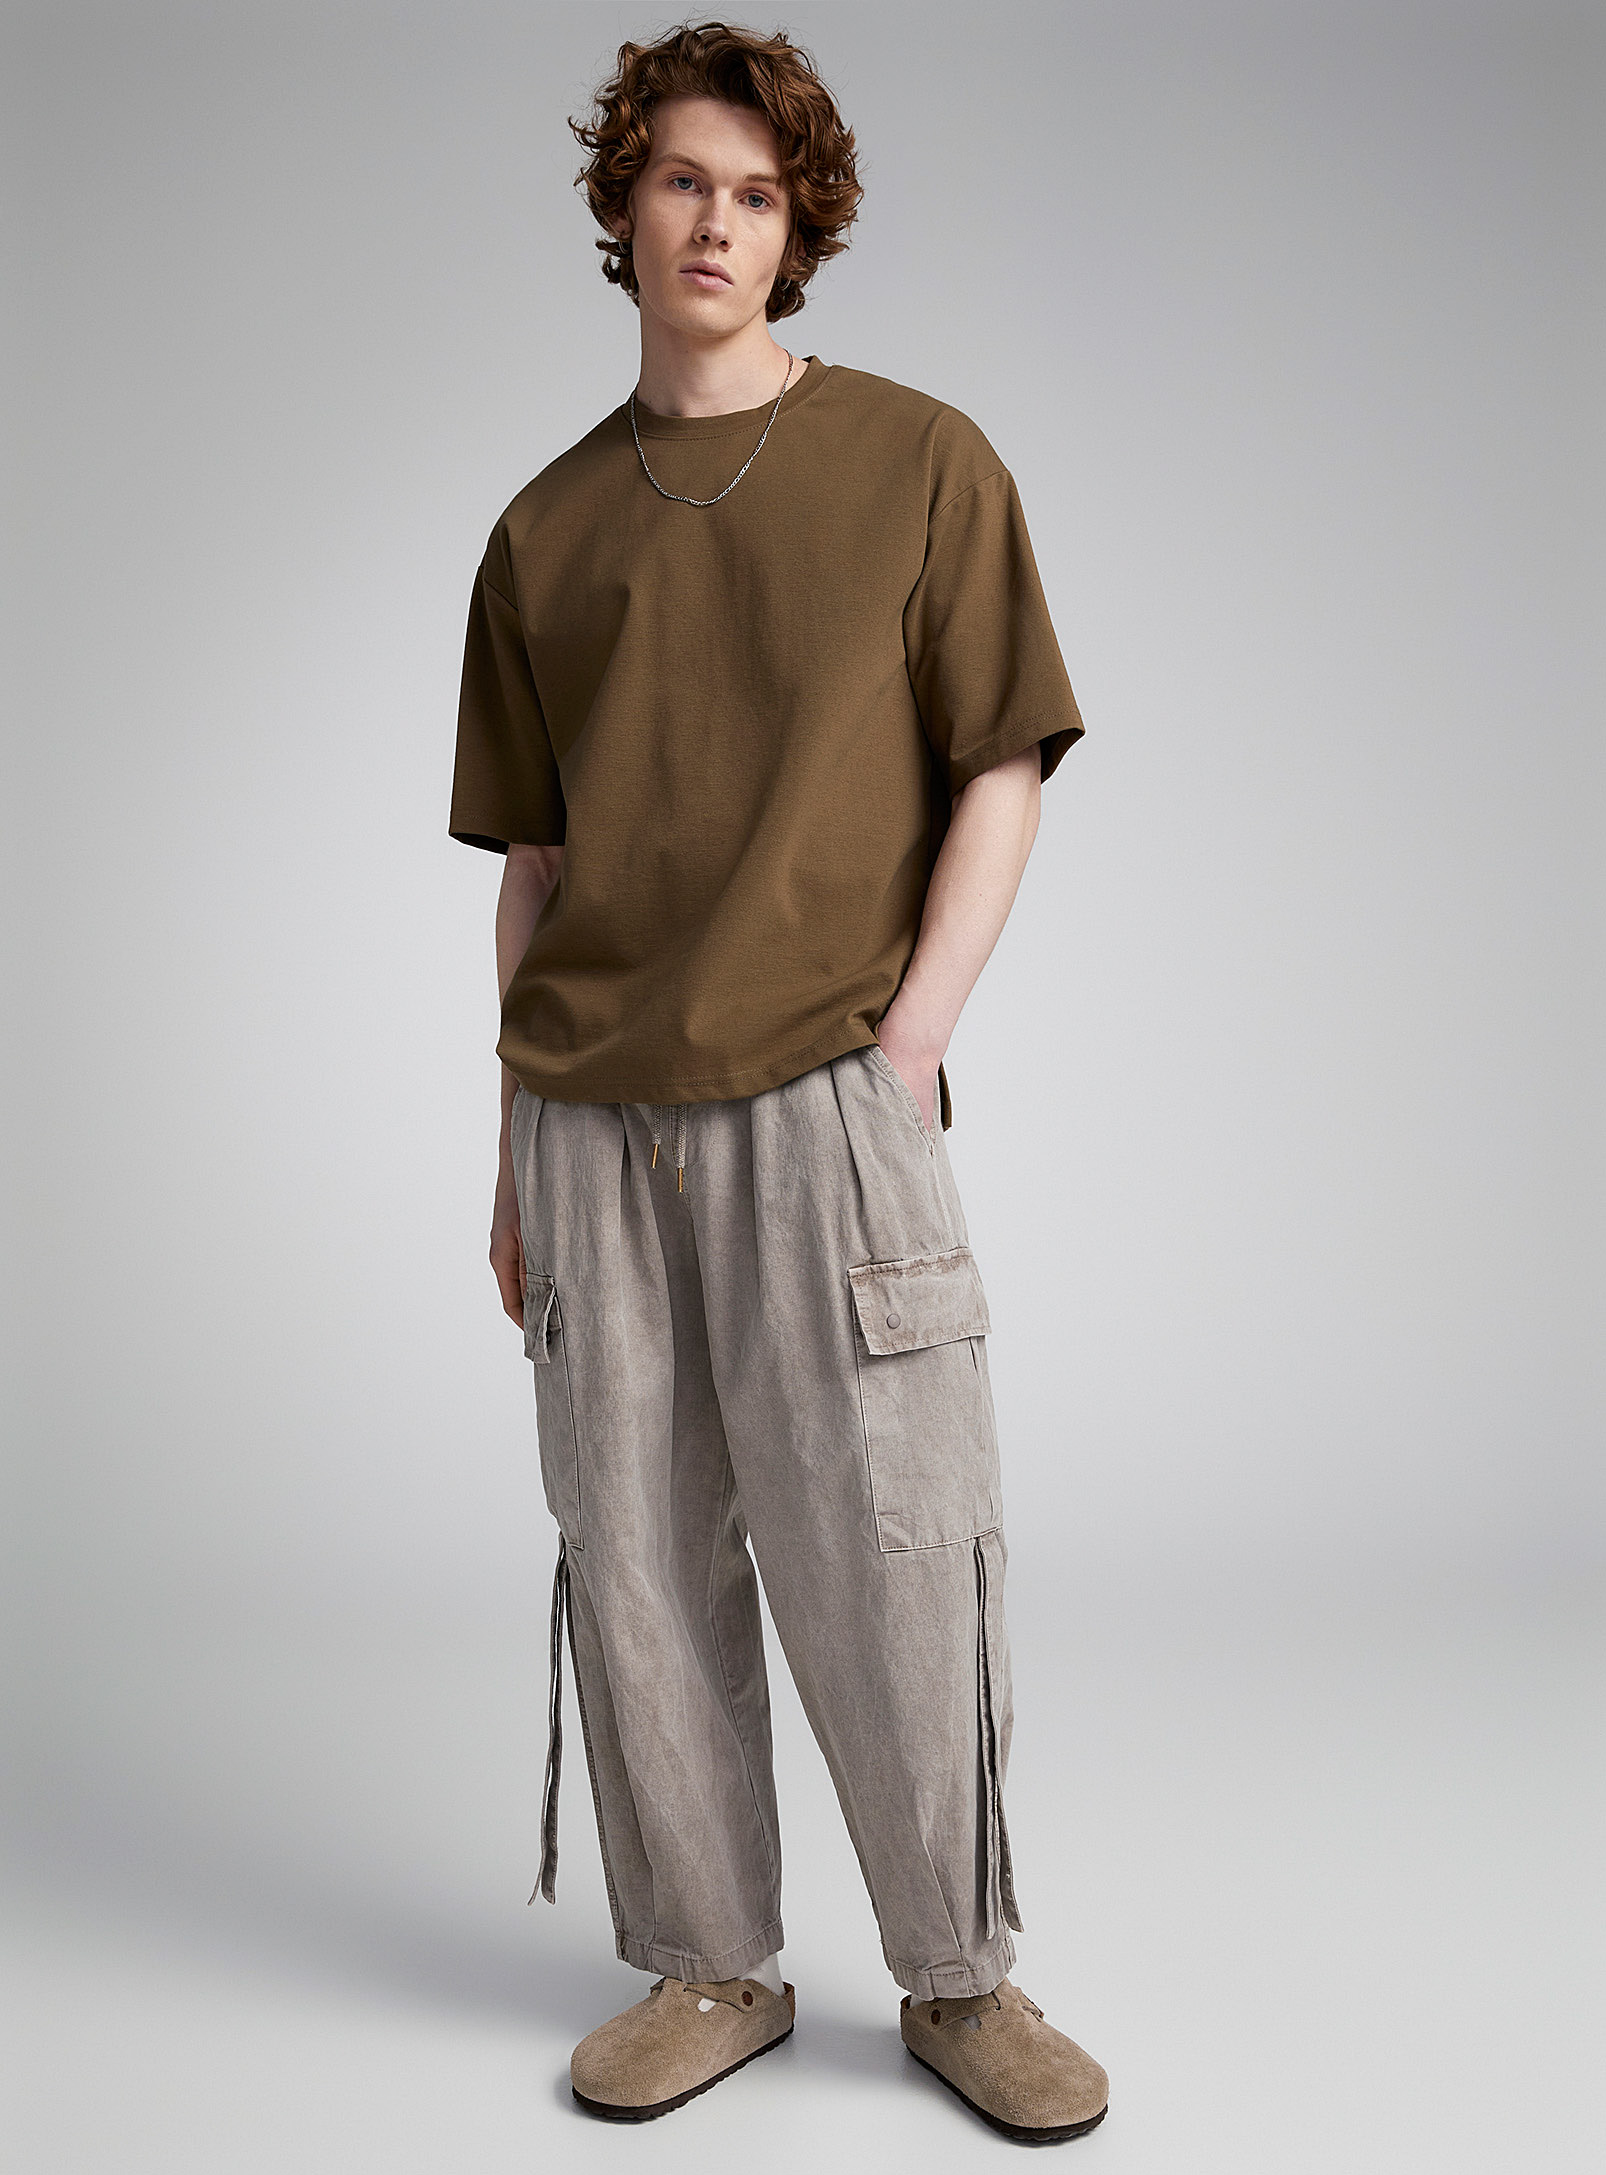 Djab - Men's Faded baggy cargo pant Loose tapered fit